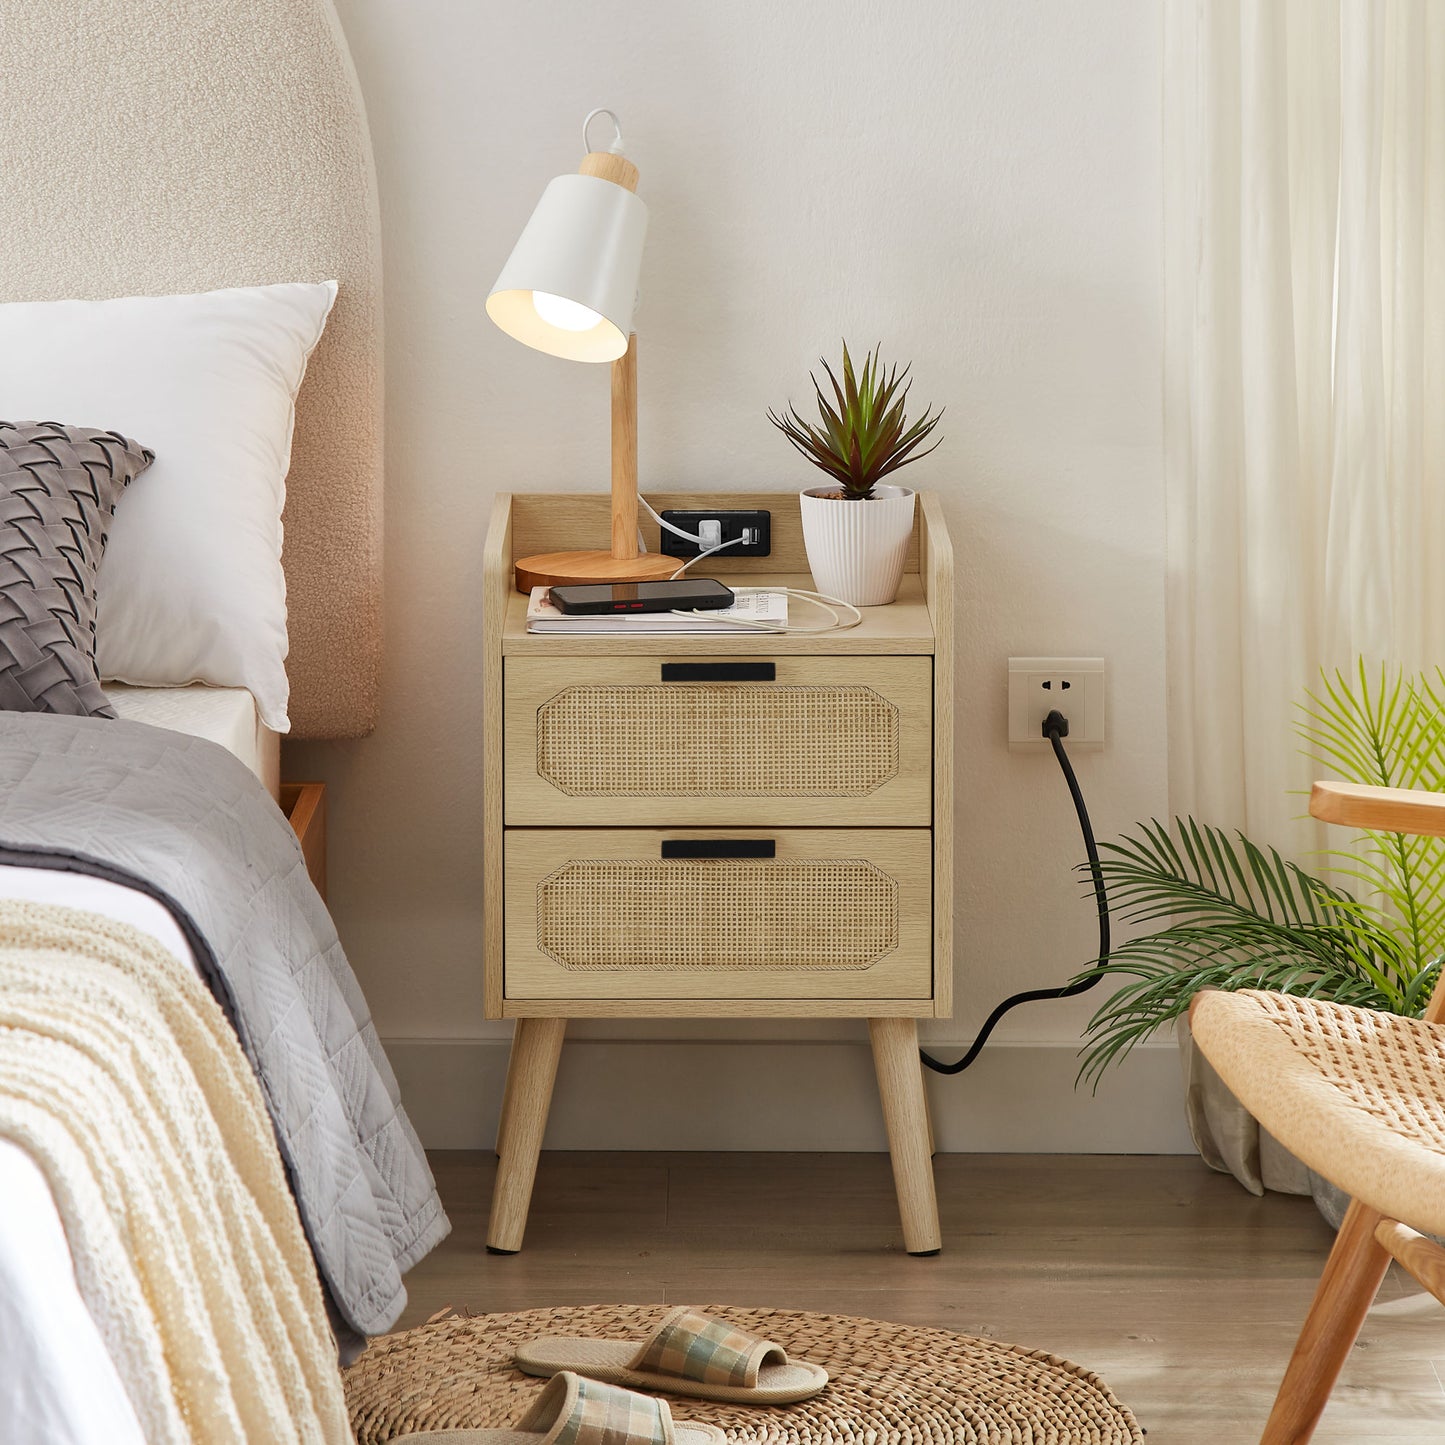 Rattan nightstand with socket side table natural handmade rattan(Natural 15.55''W*13.78''D*23.82''H)